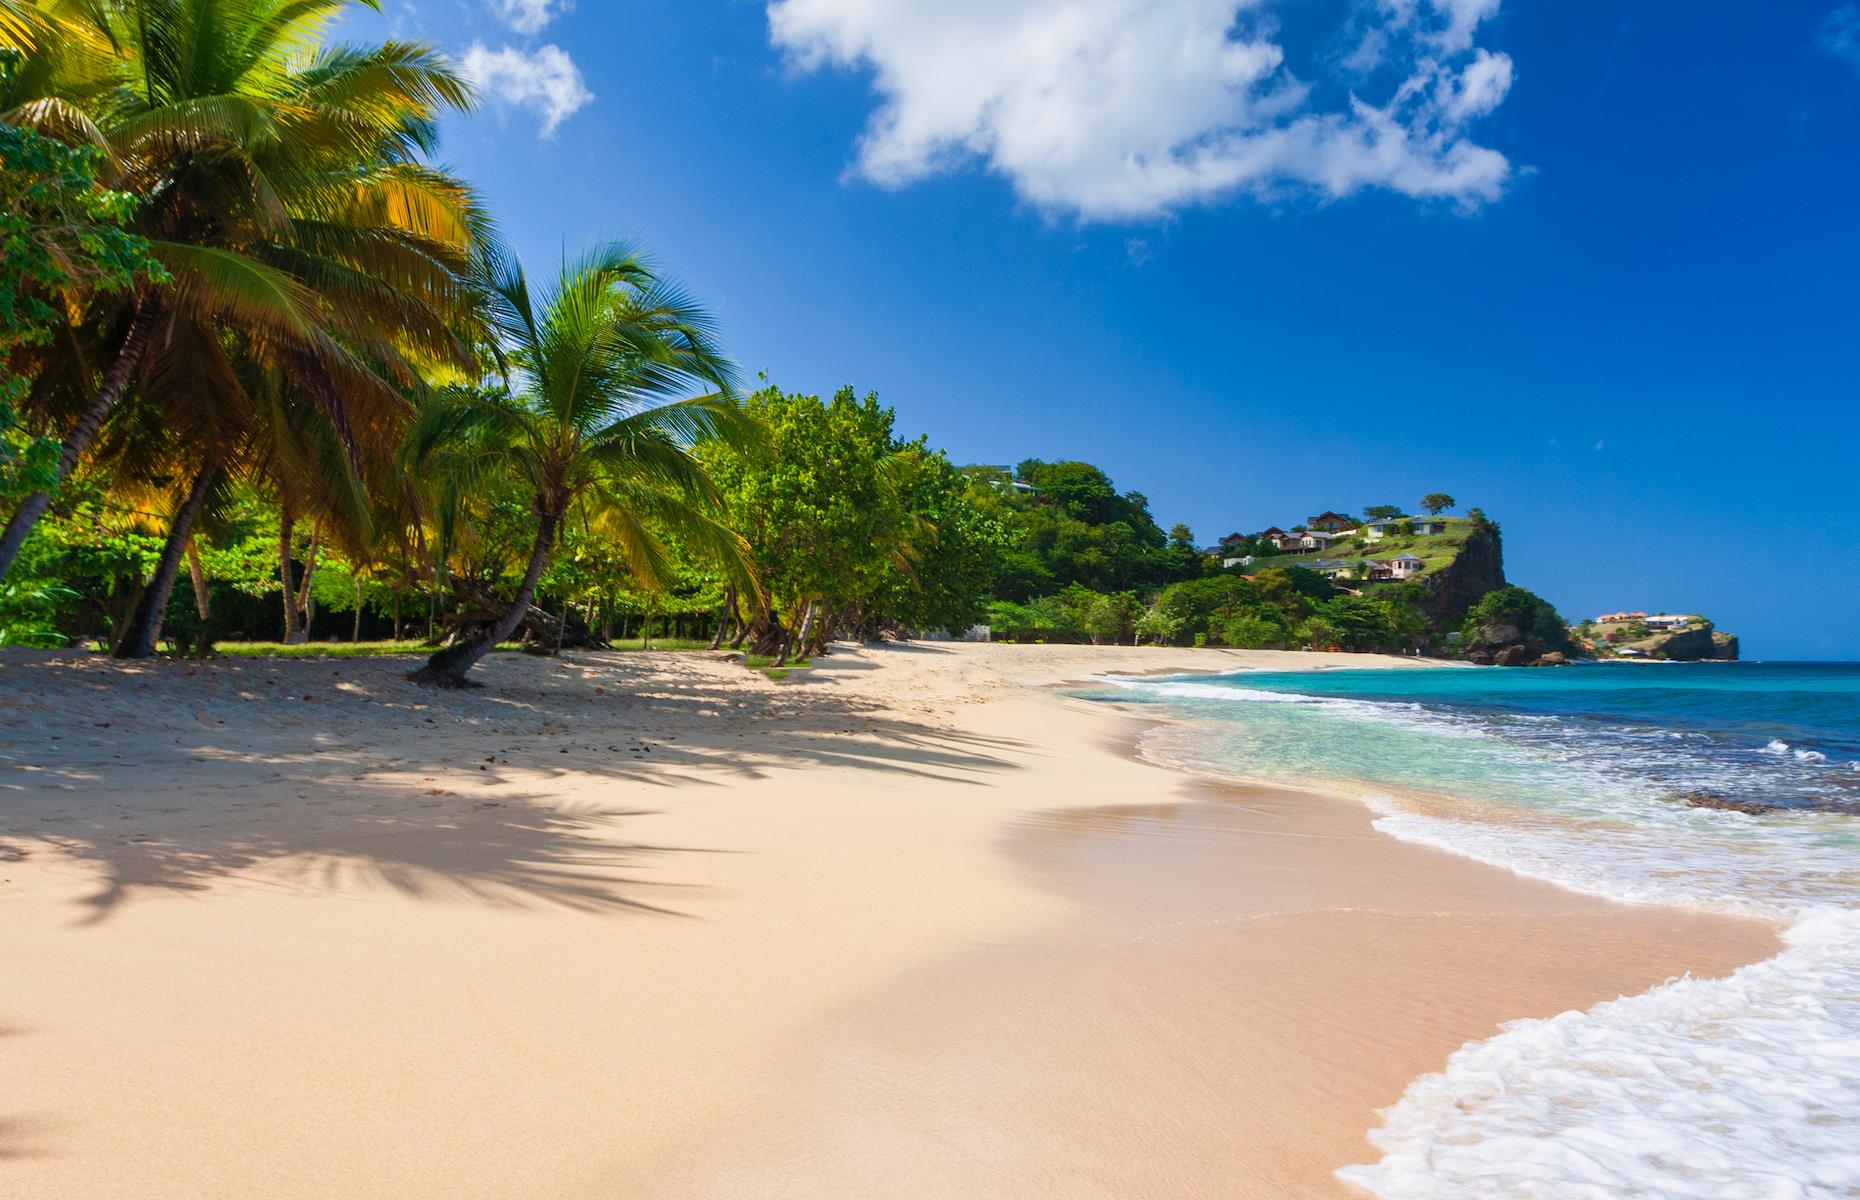 <p>With a population of 113,445, the tri-island state of Grenada, Carriacou and Petite Martinique is the most populous of our countries but still one of the Caribbean's sleepiest and crowd-free corners. Its 40 white sand beaches are all that you could want from a tropical island getaway – the gorgeous sweep of Grand Anse Beach is its most famous. While its pint-size harborfront capital St George’s is wonderful for a potter – don’t miss the Grenada National Museum and stroll up to 18th-century Fort George on the promontory for dreamy views across the pretty harbor with its bobbing fishing boats.</p>  <p><a href="https://www.loveexploring.com/galleries/97908/picture-perfect-ports-from-the-skies?page=1"><strong>Check out these picture-perfect ports from the skies</strong></a></p>